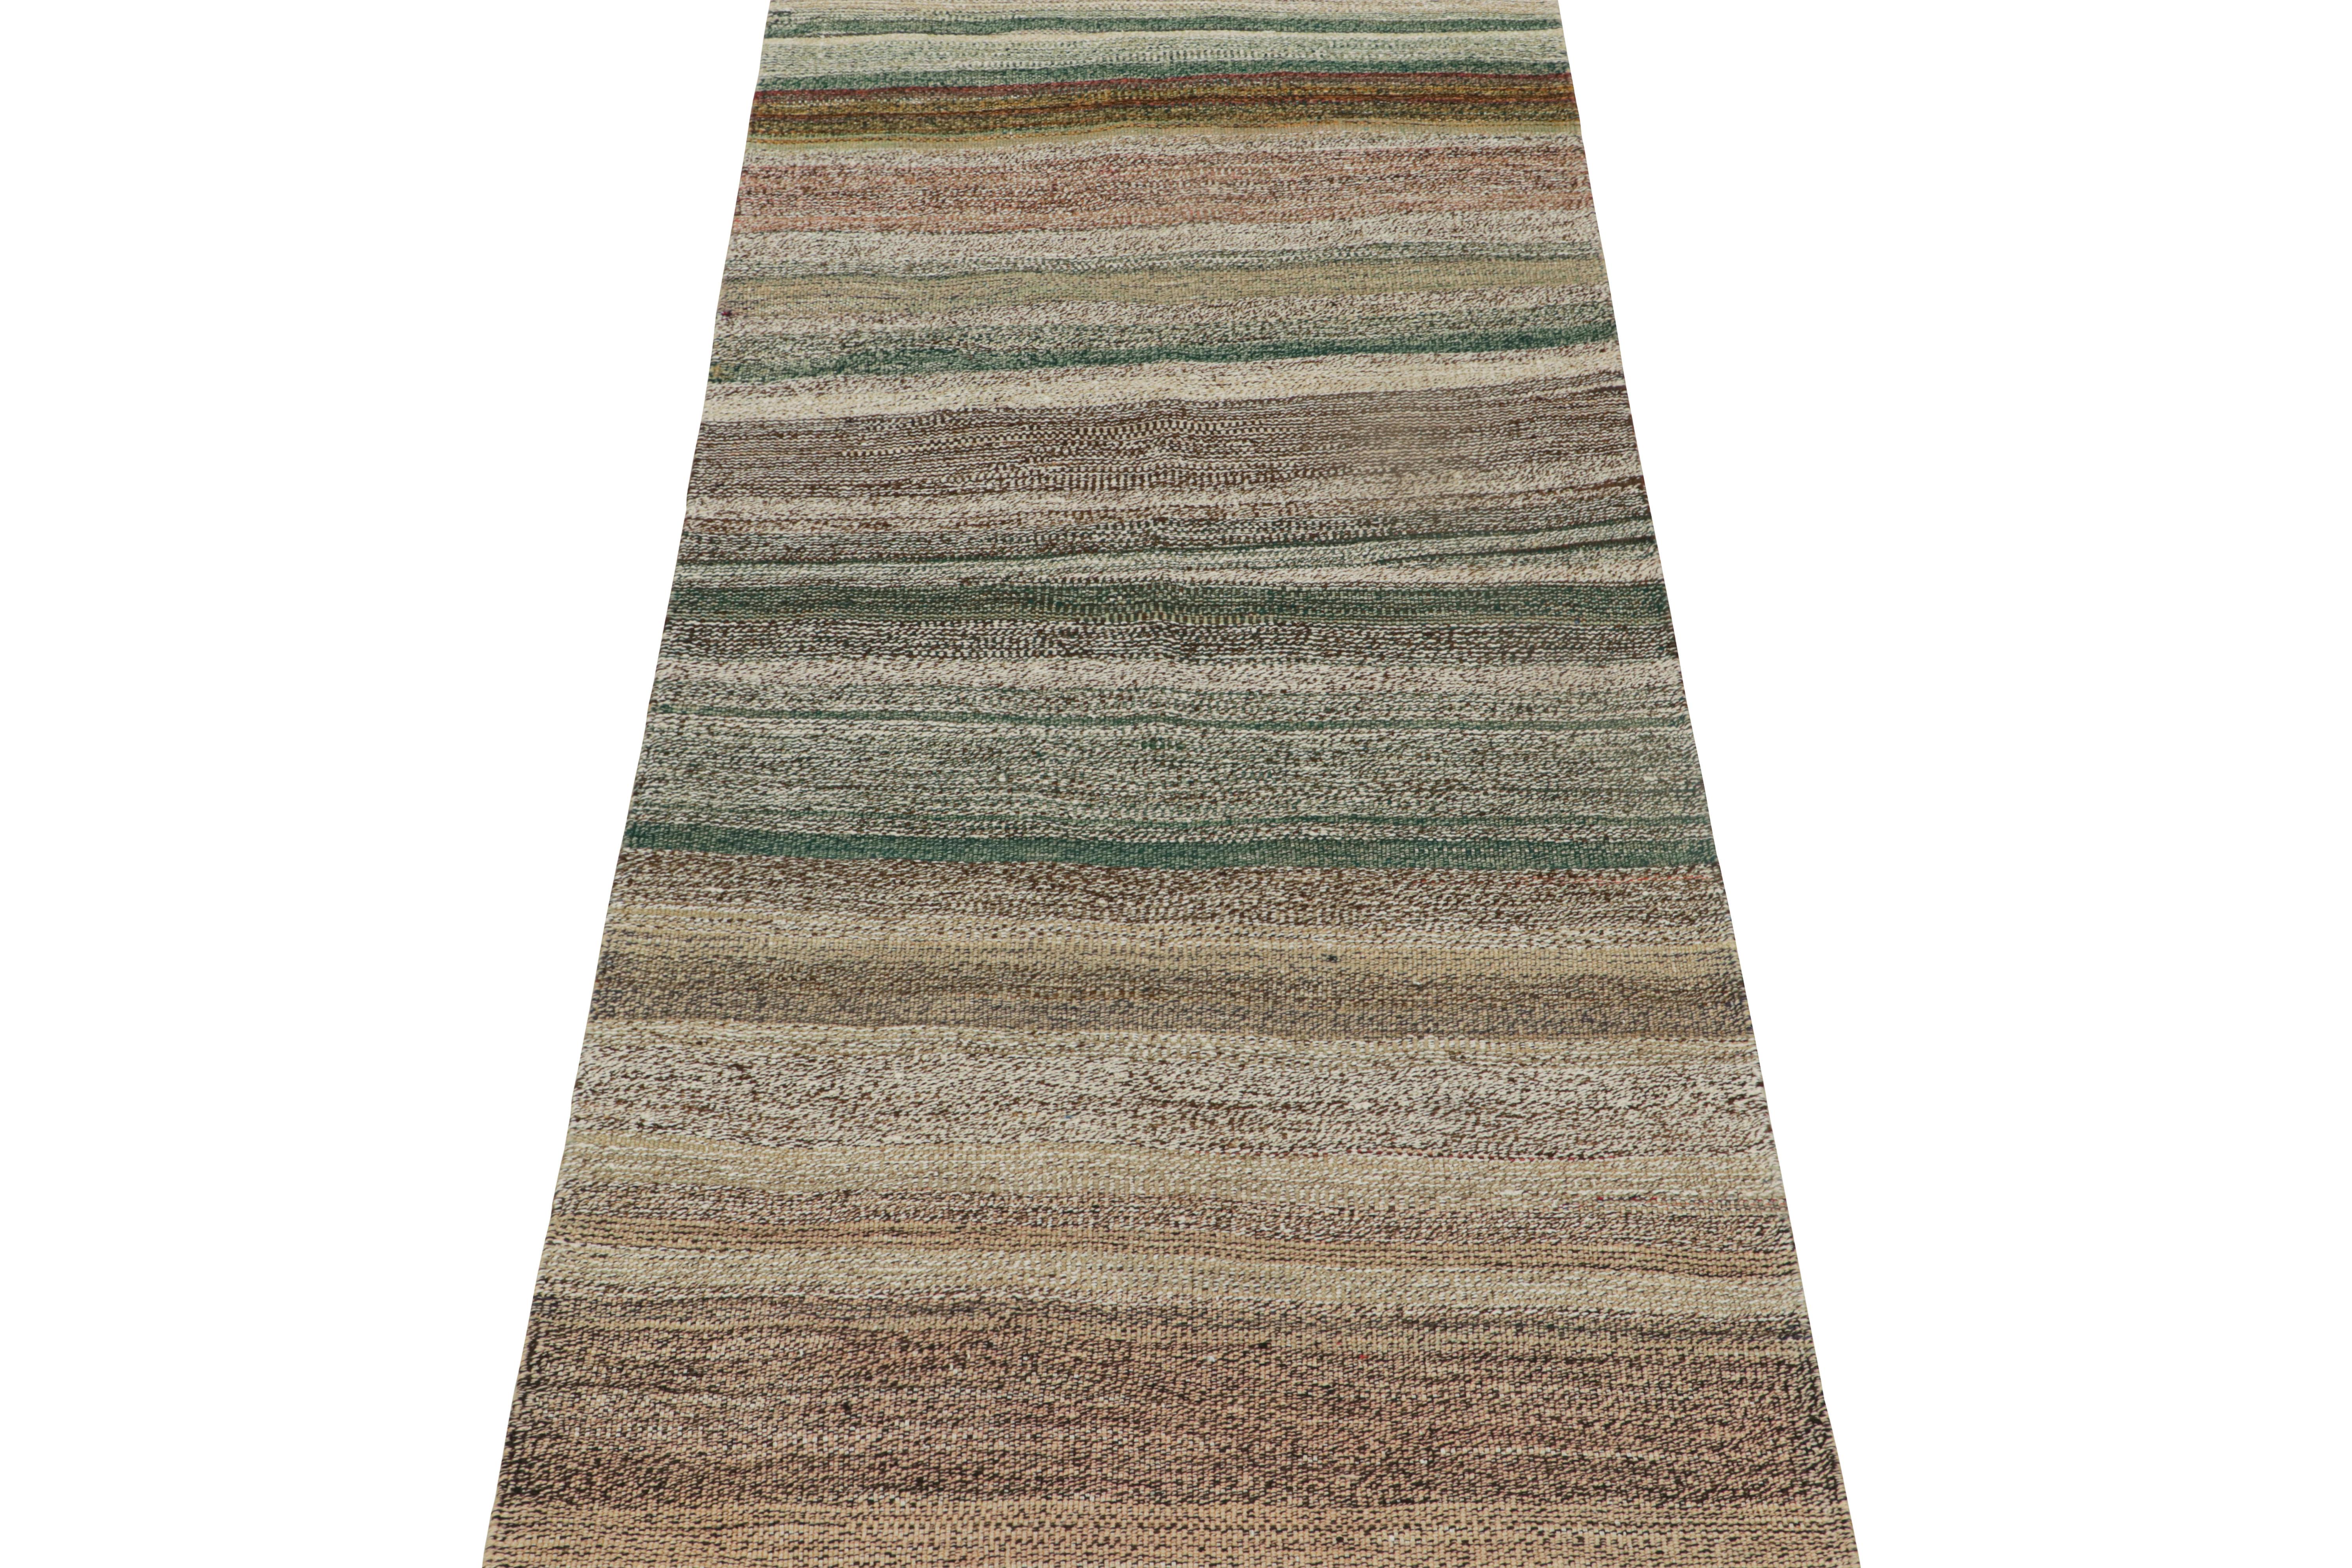 This vintage 4x9 Persian Kilim is a rare midcentury tribal runner, handwoven in wool circa 1950-1960. 

Its design enjoys a meticulous striae of colors—the sheer variety of which one seldom sees in its period. Keen eyes will note forest green,